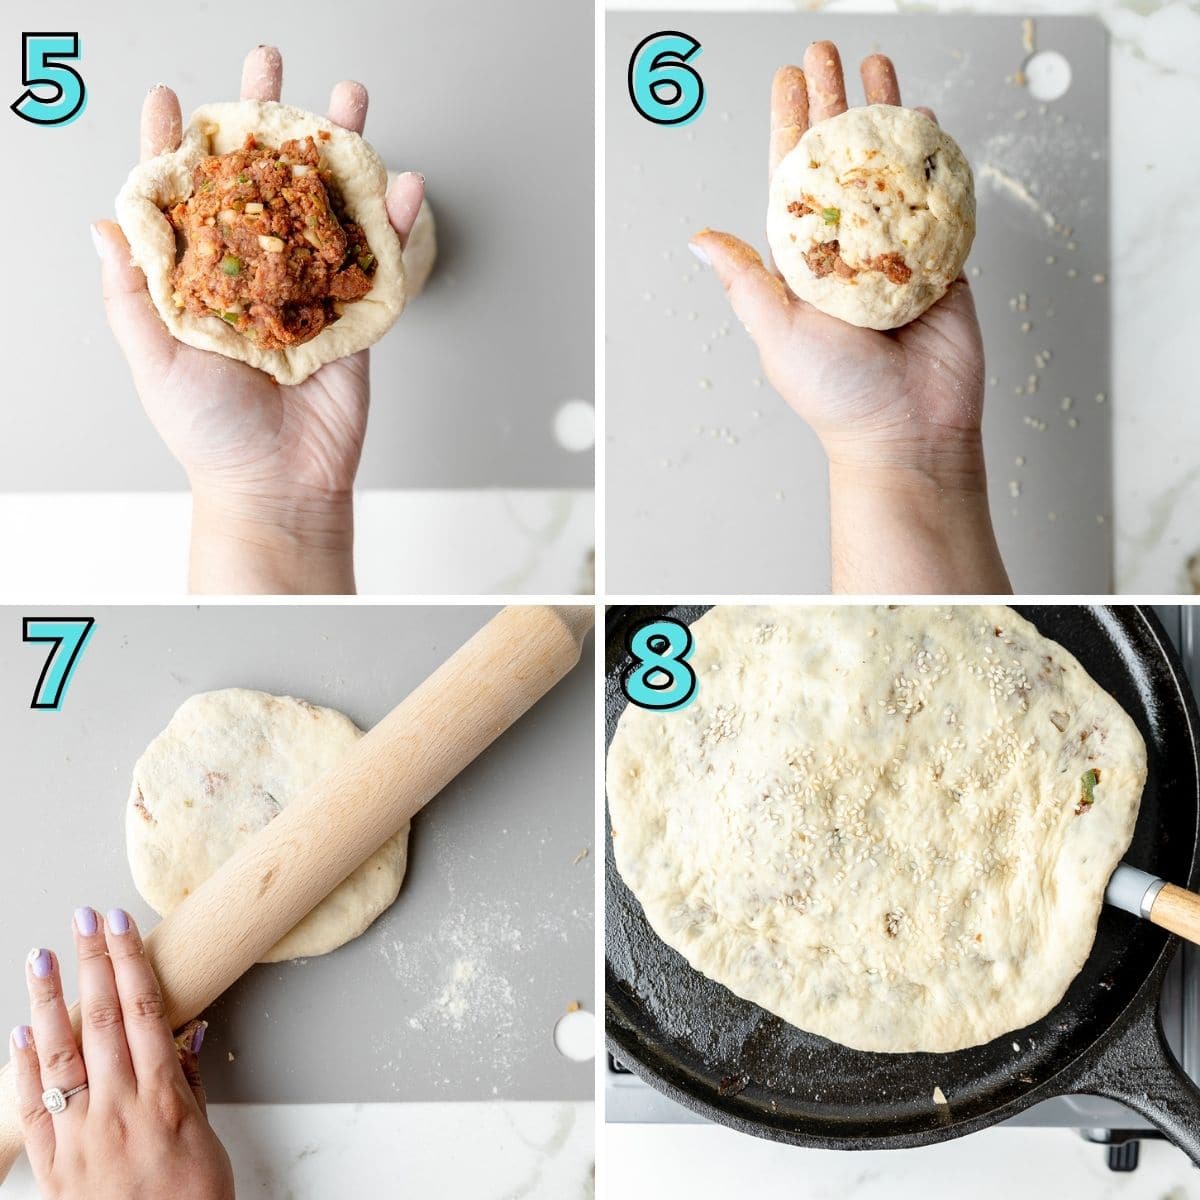 Step by step instructions to prepare stuffed naan.